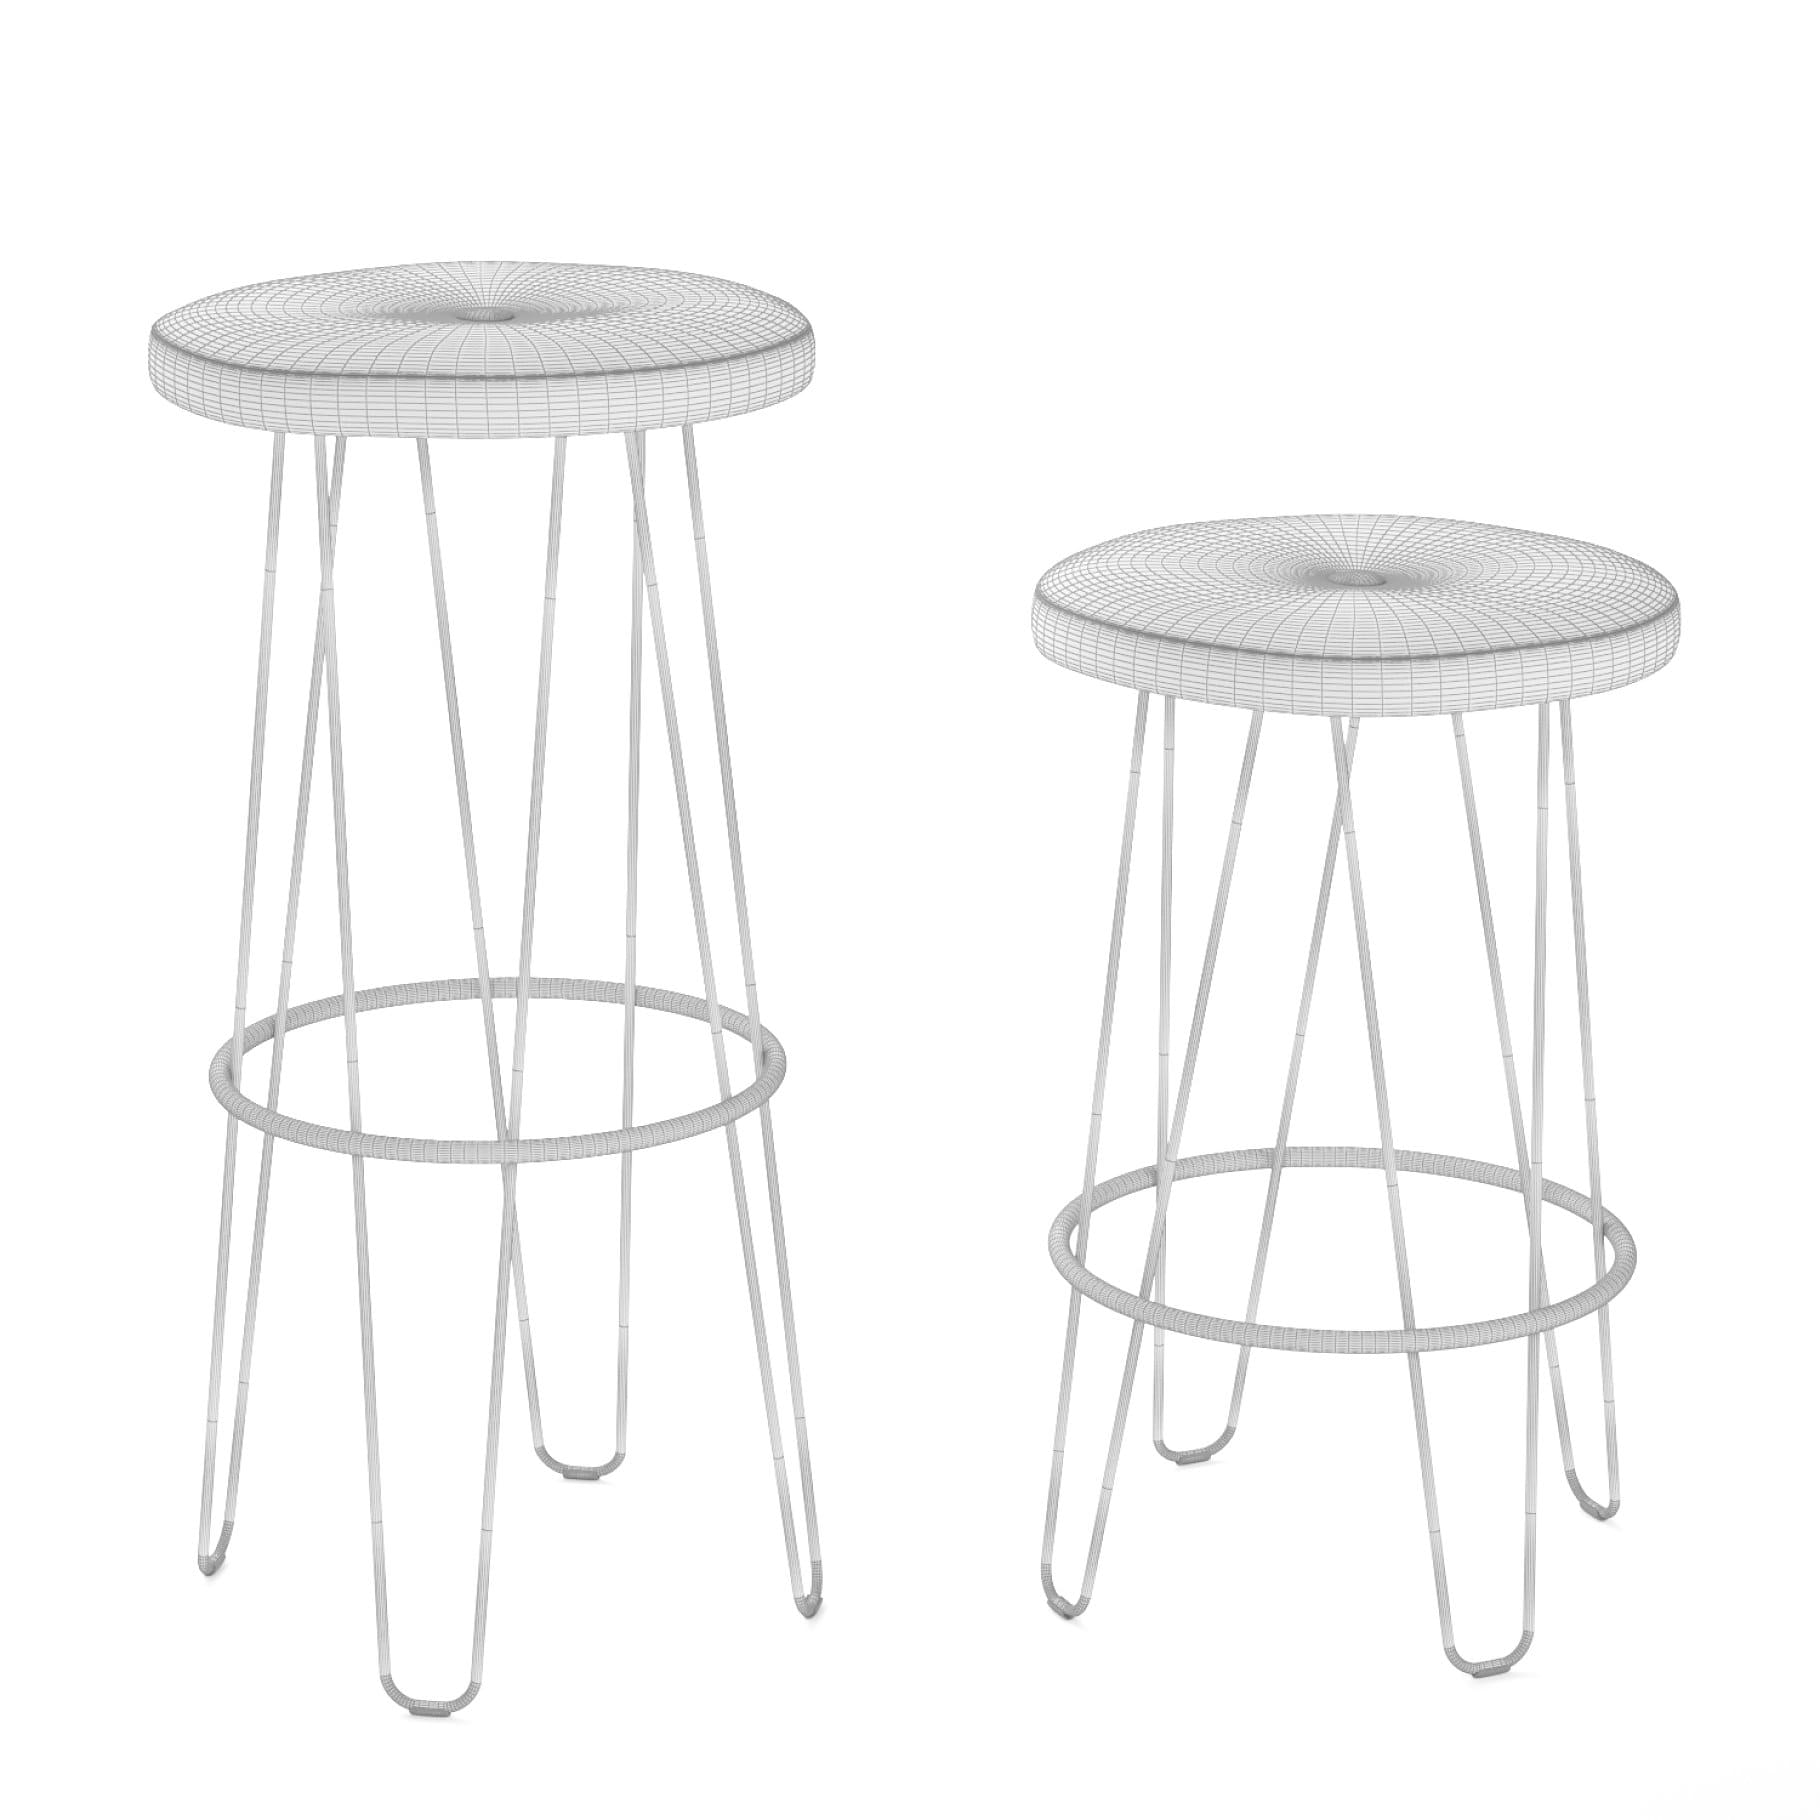 3D model of chairs with metal legs.